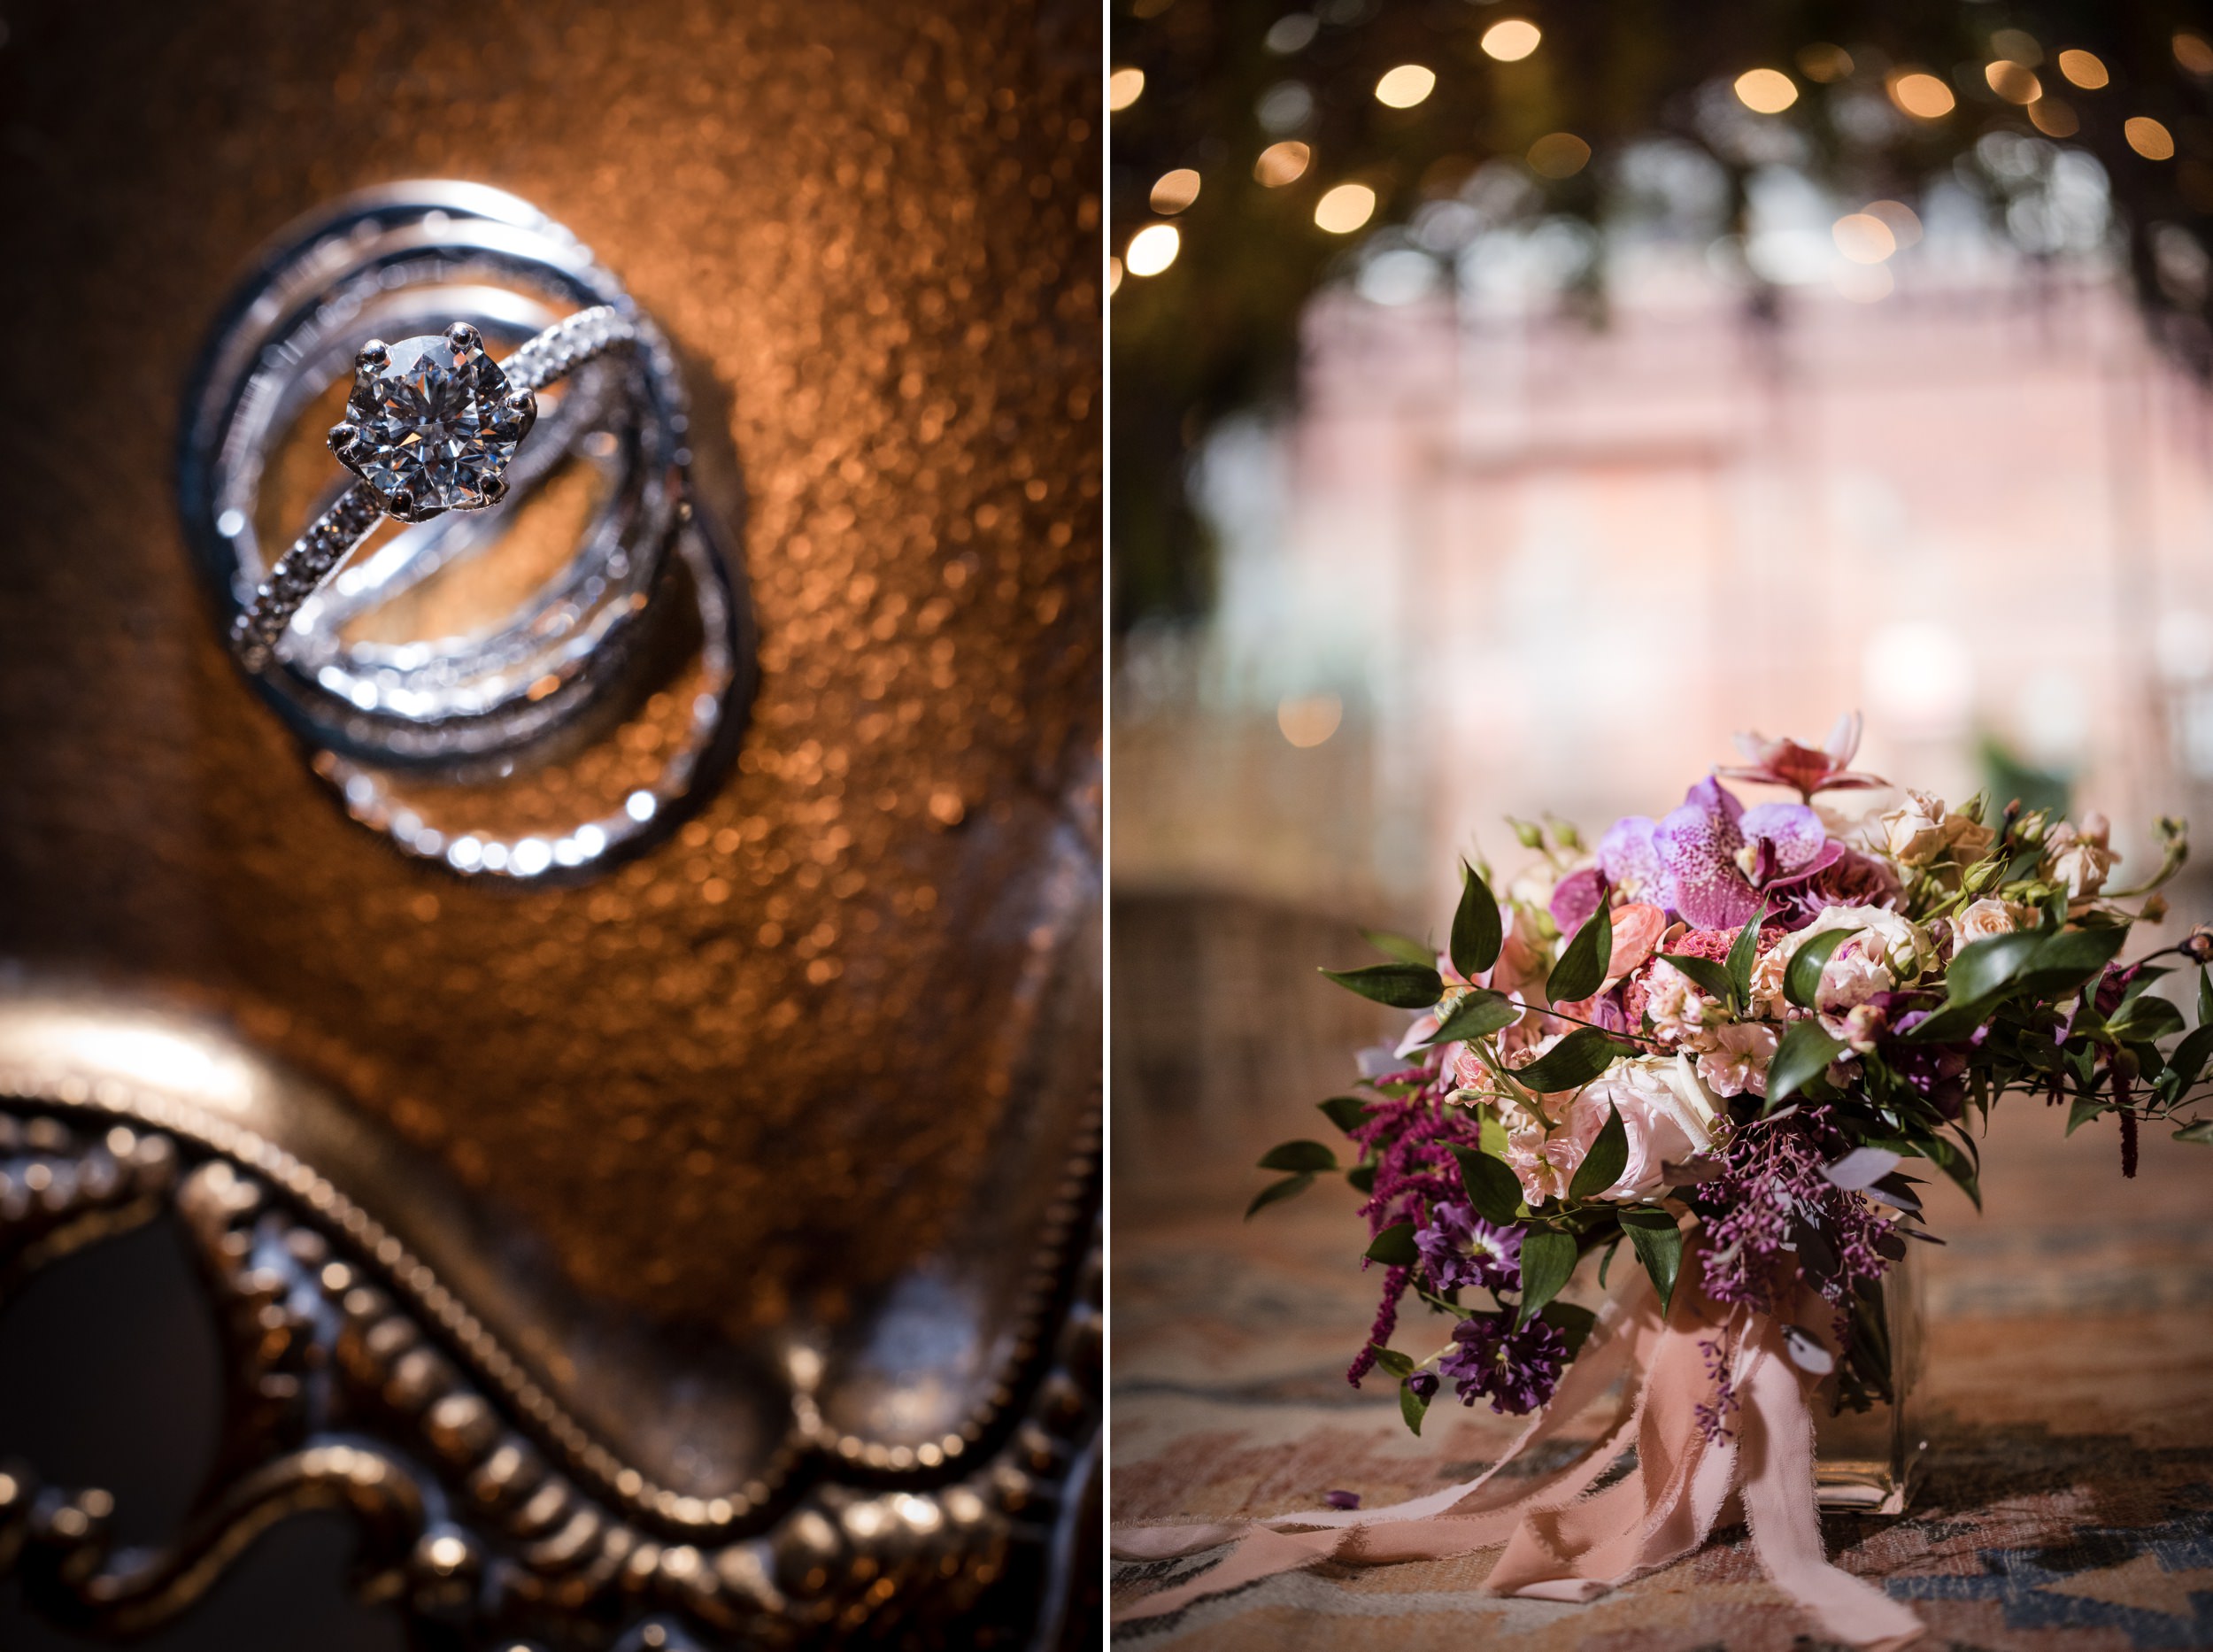 Detail photographs at a Beekman Hotel wedding in NYC